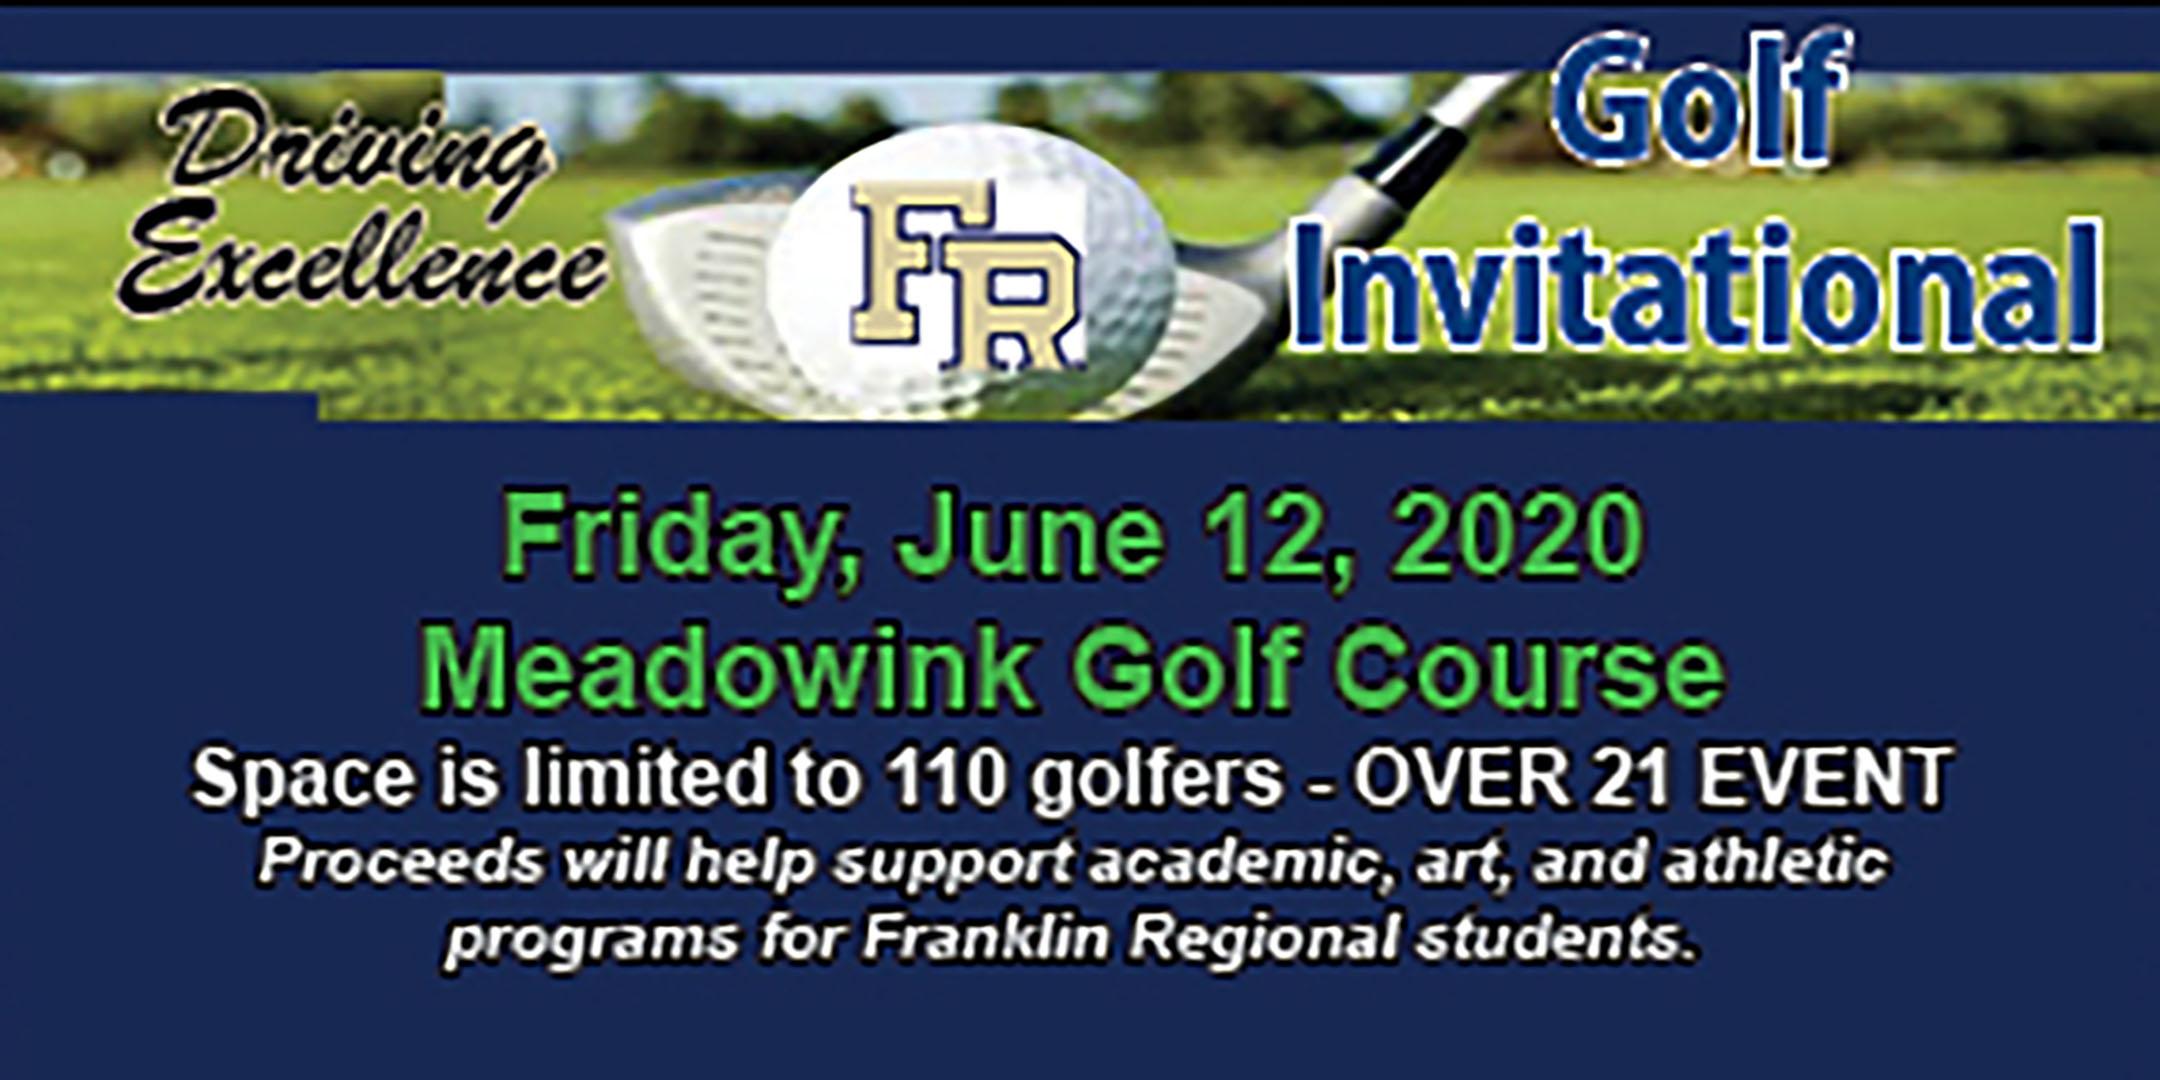 2020 Driving Excellence: Golf Invitational